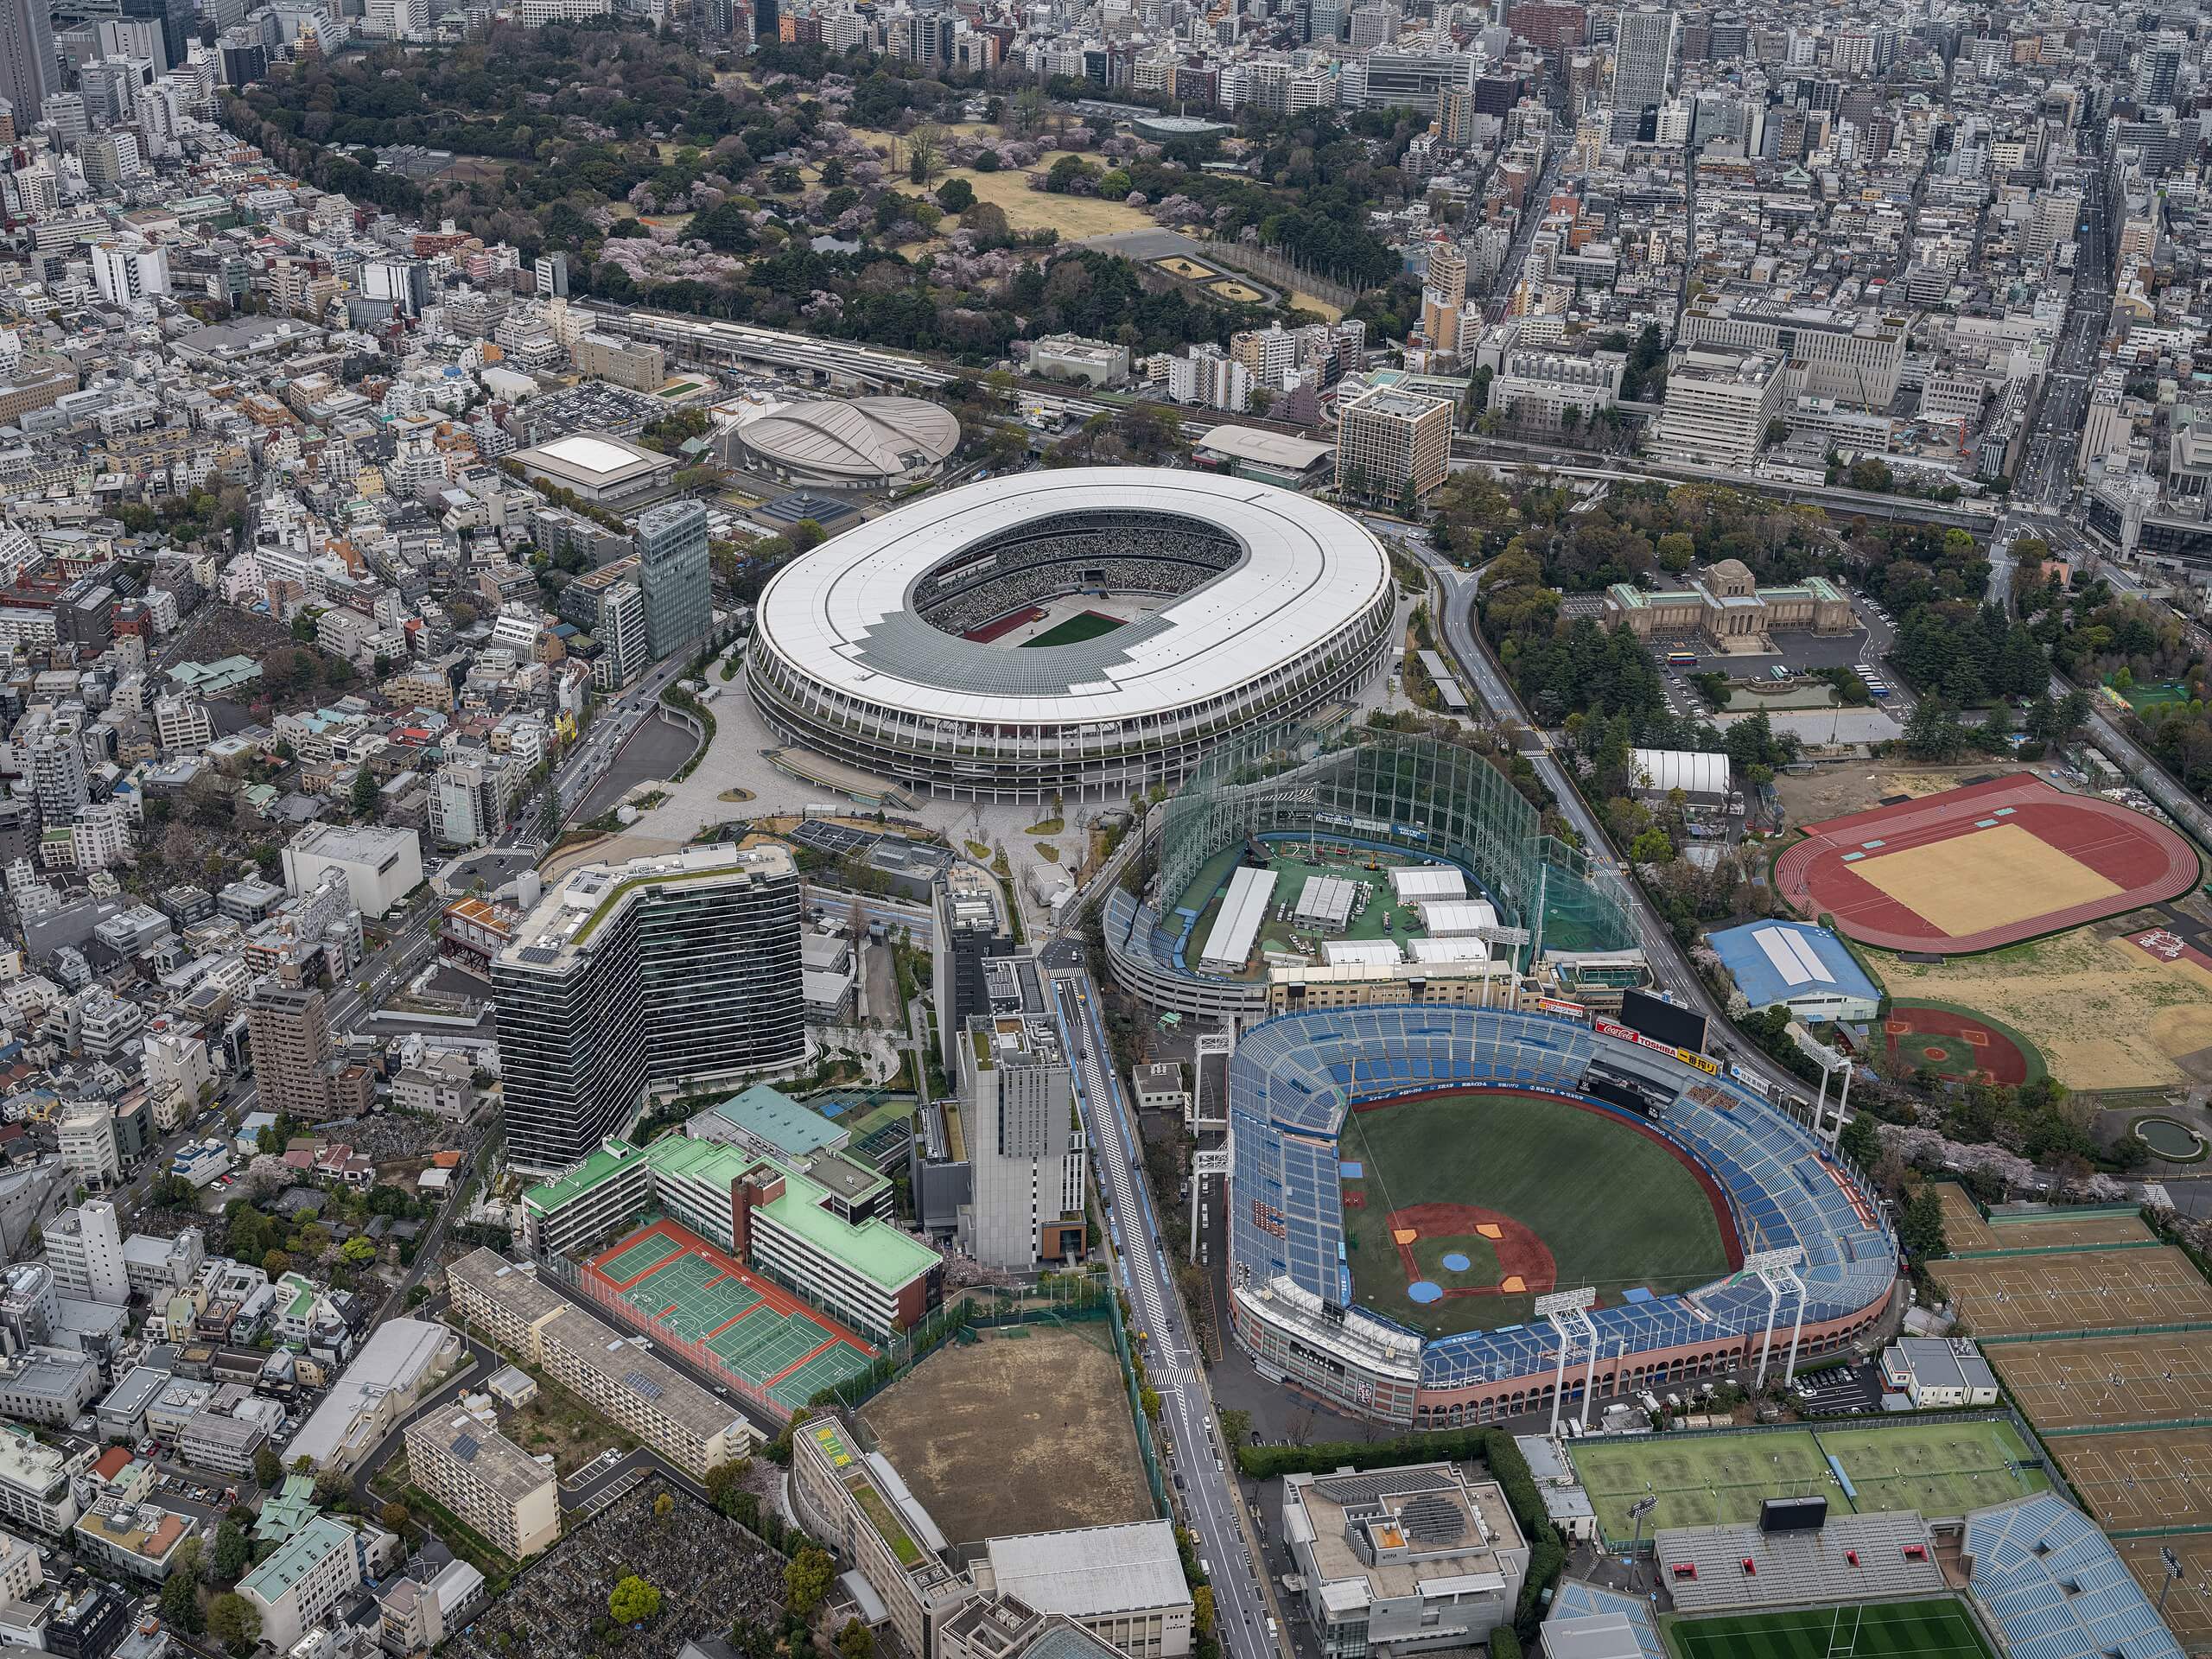 Aerial photo of tokyo and the new national stadium for the olympics